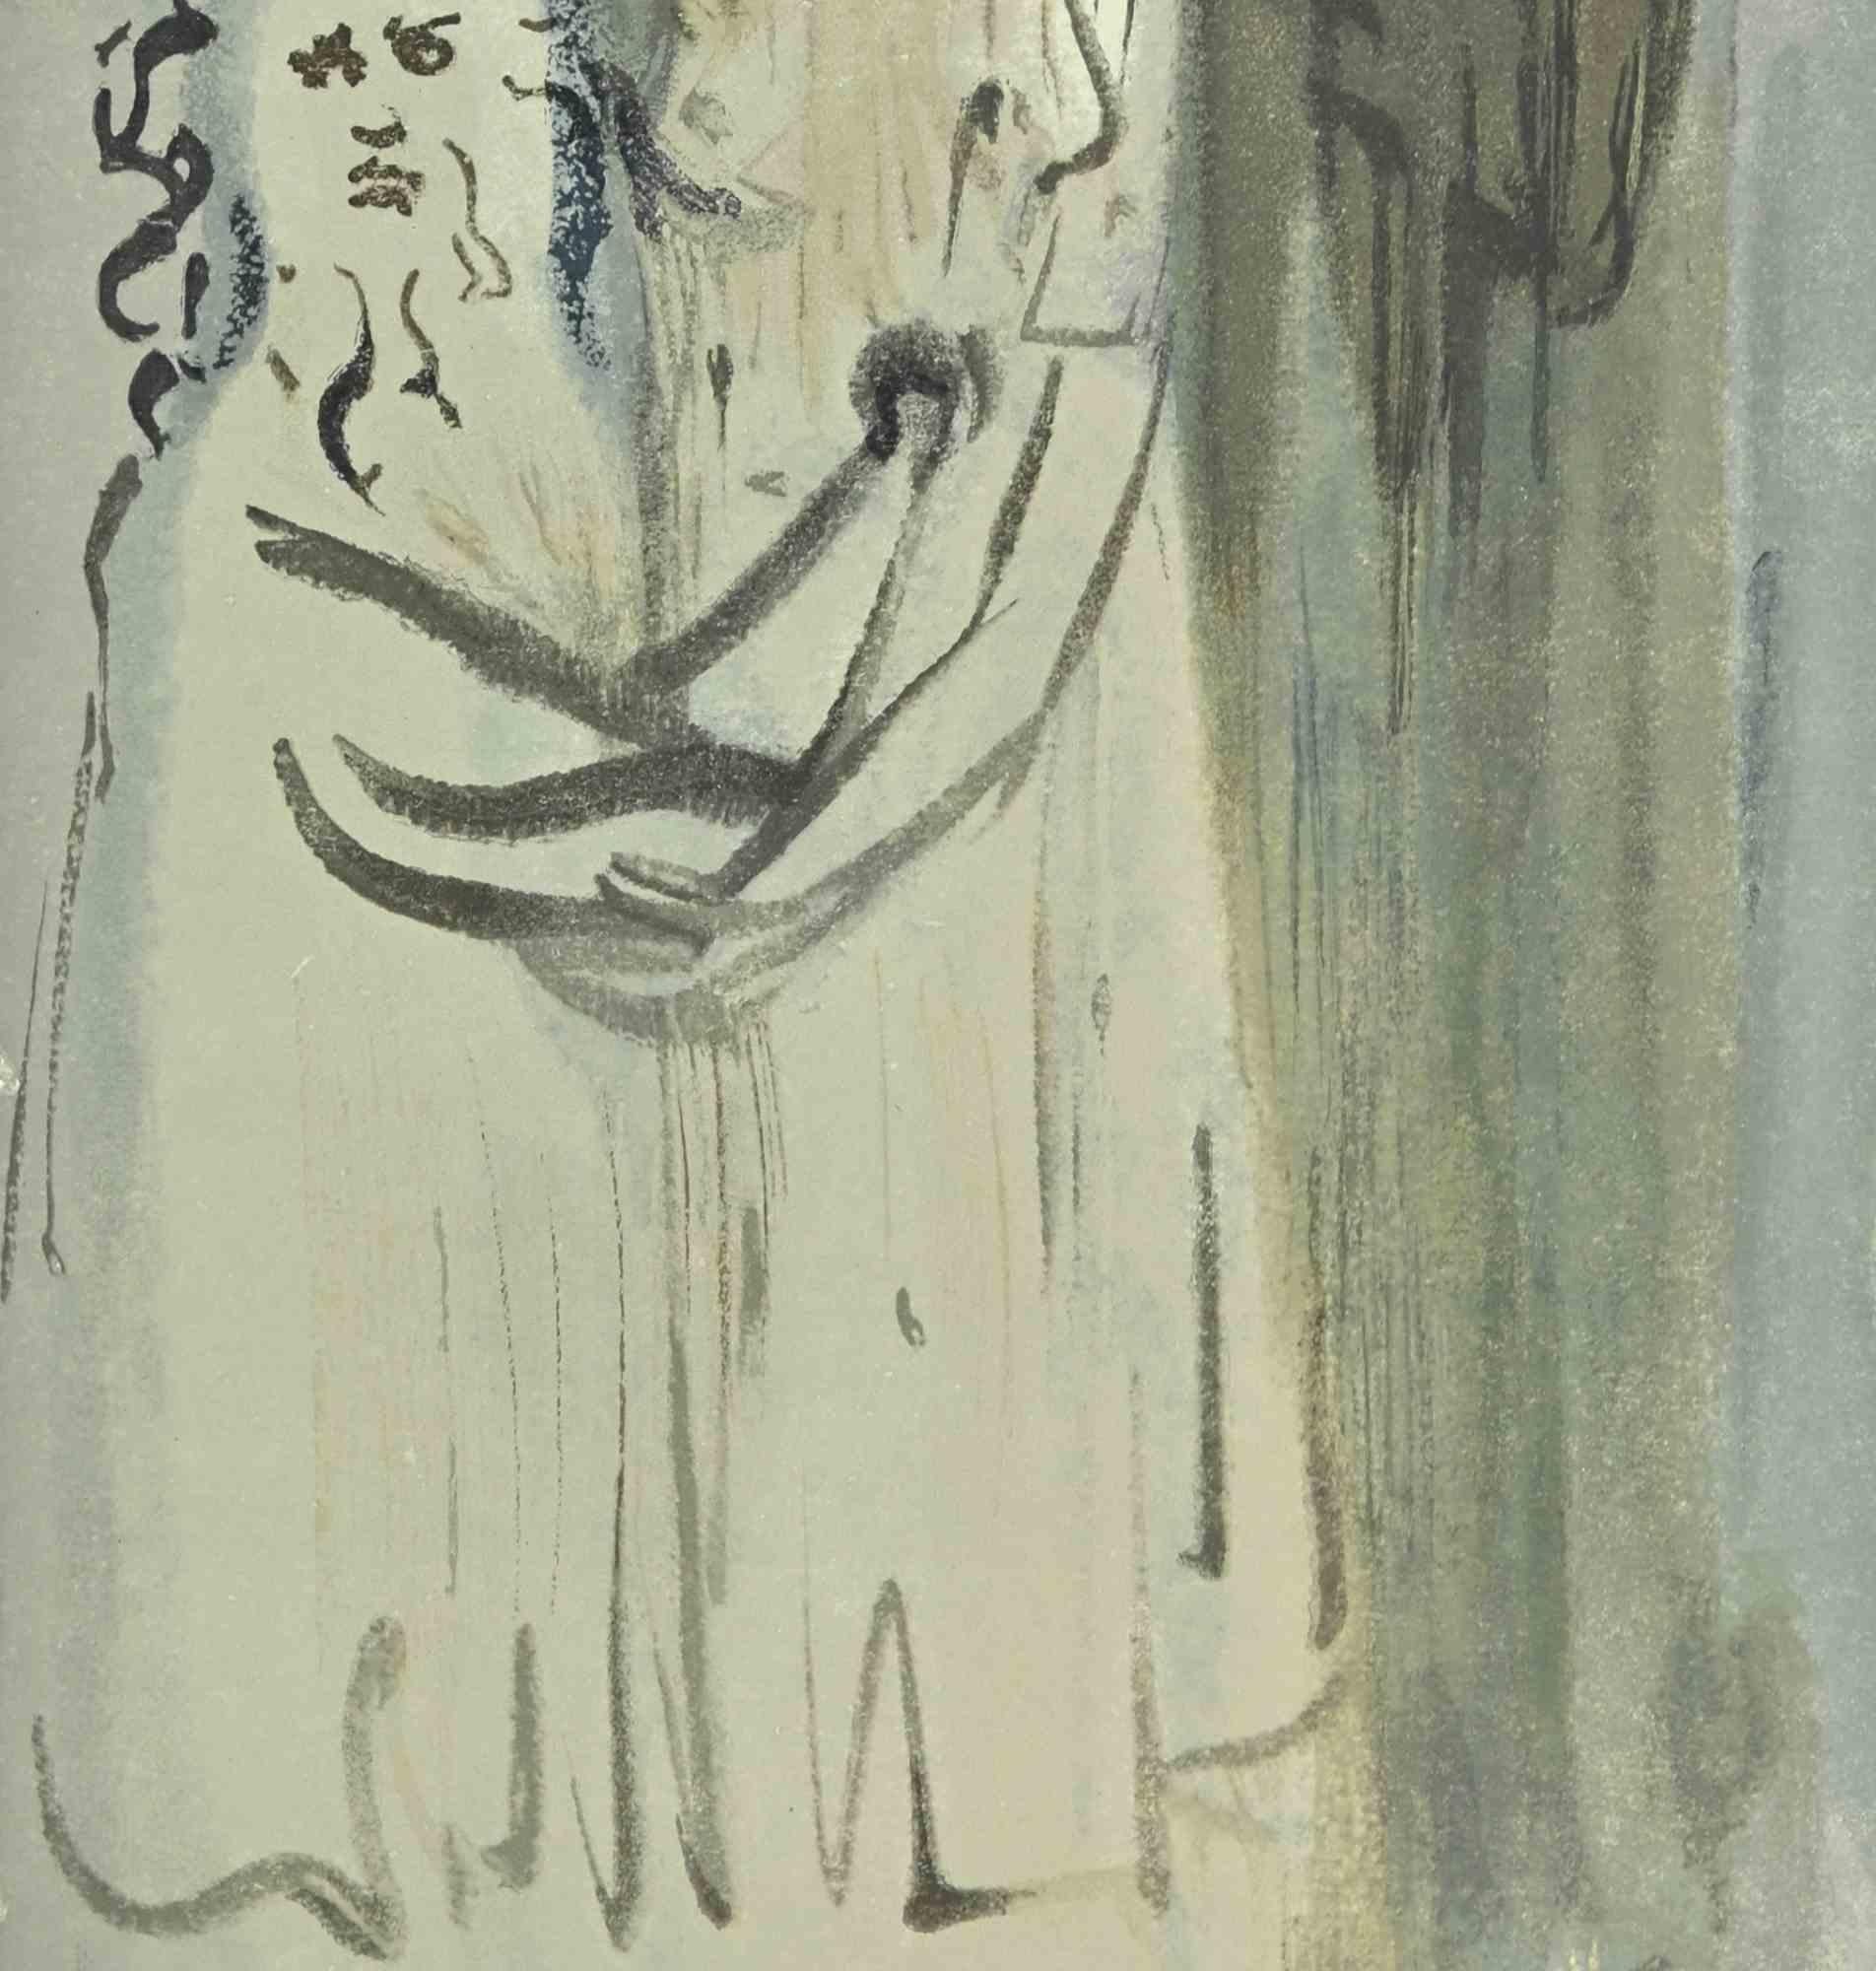 The Wrathful - Woodcut - 1963 - Print by Salvador Dalí